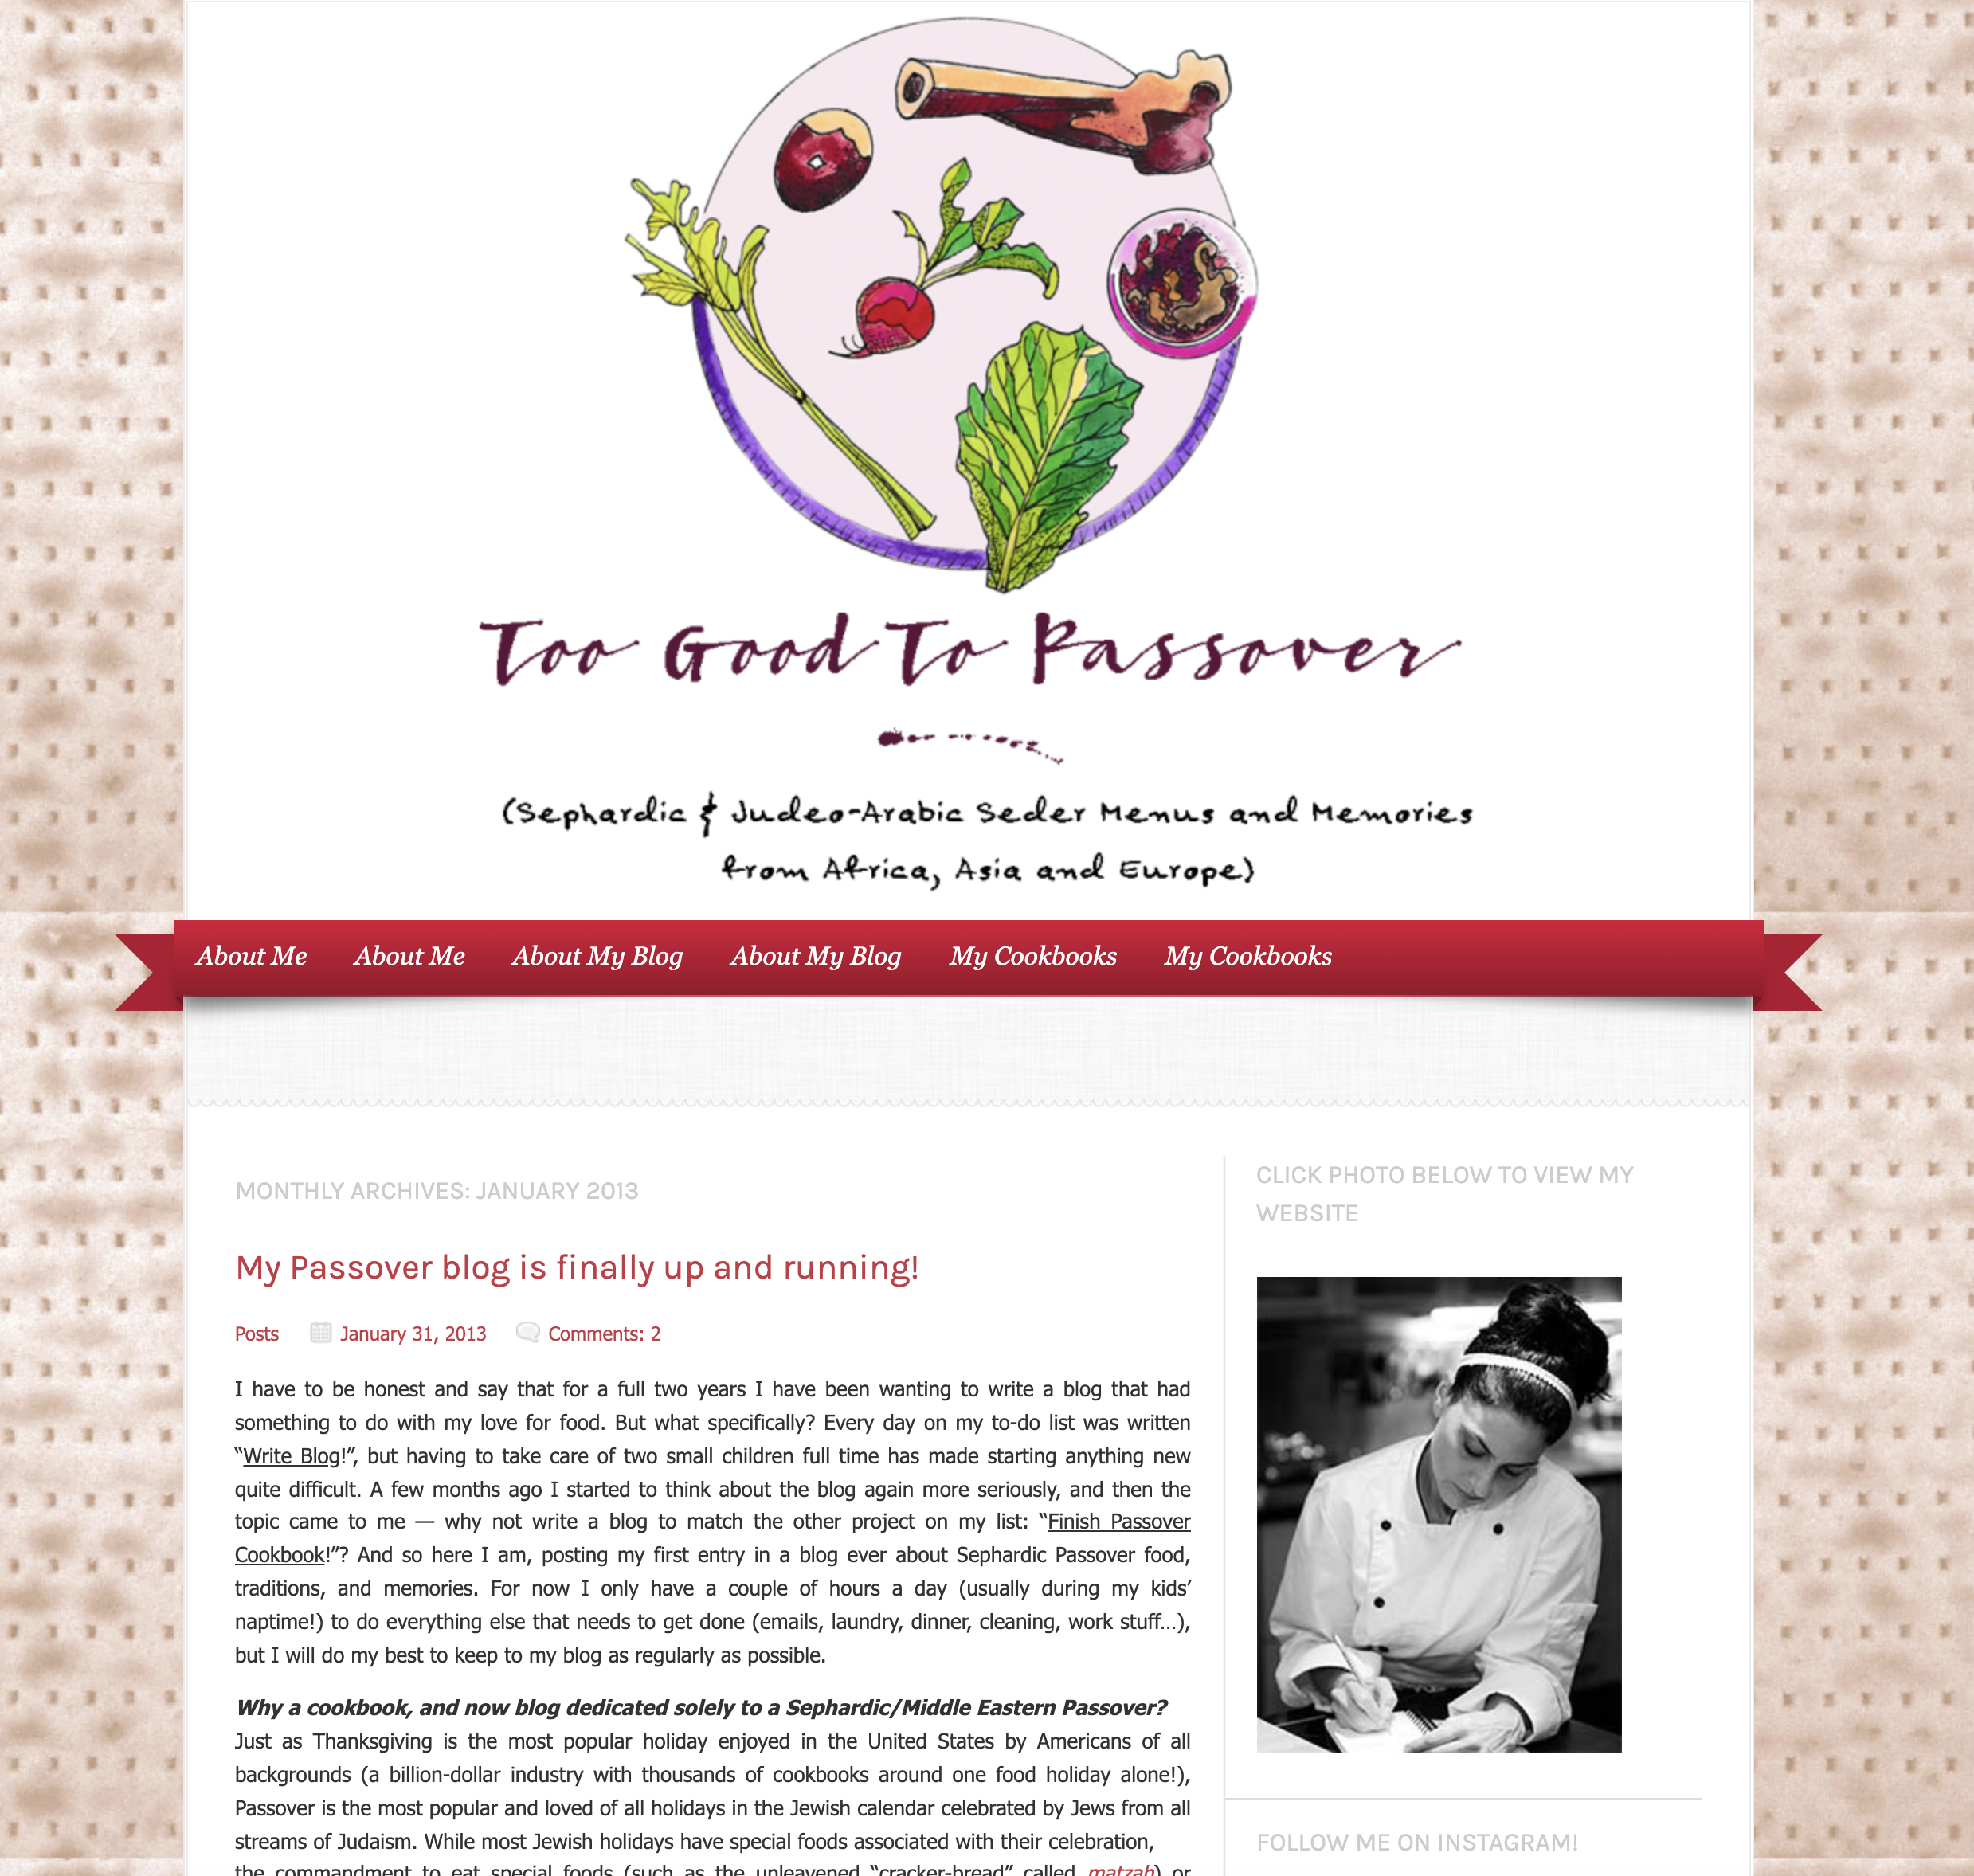 My Passover blog is finally up and running!